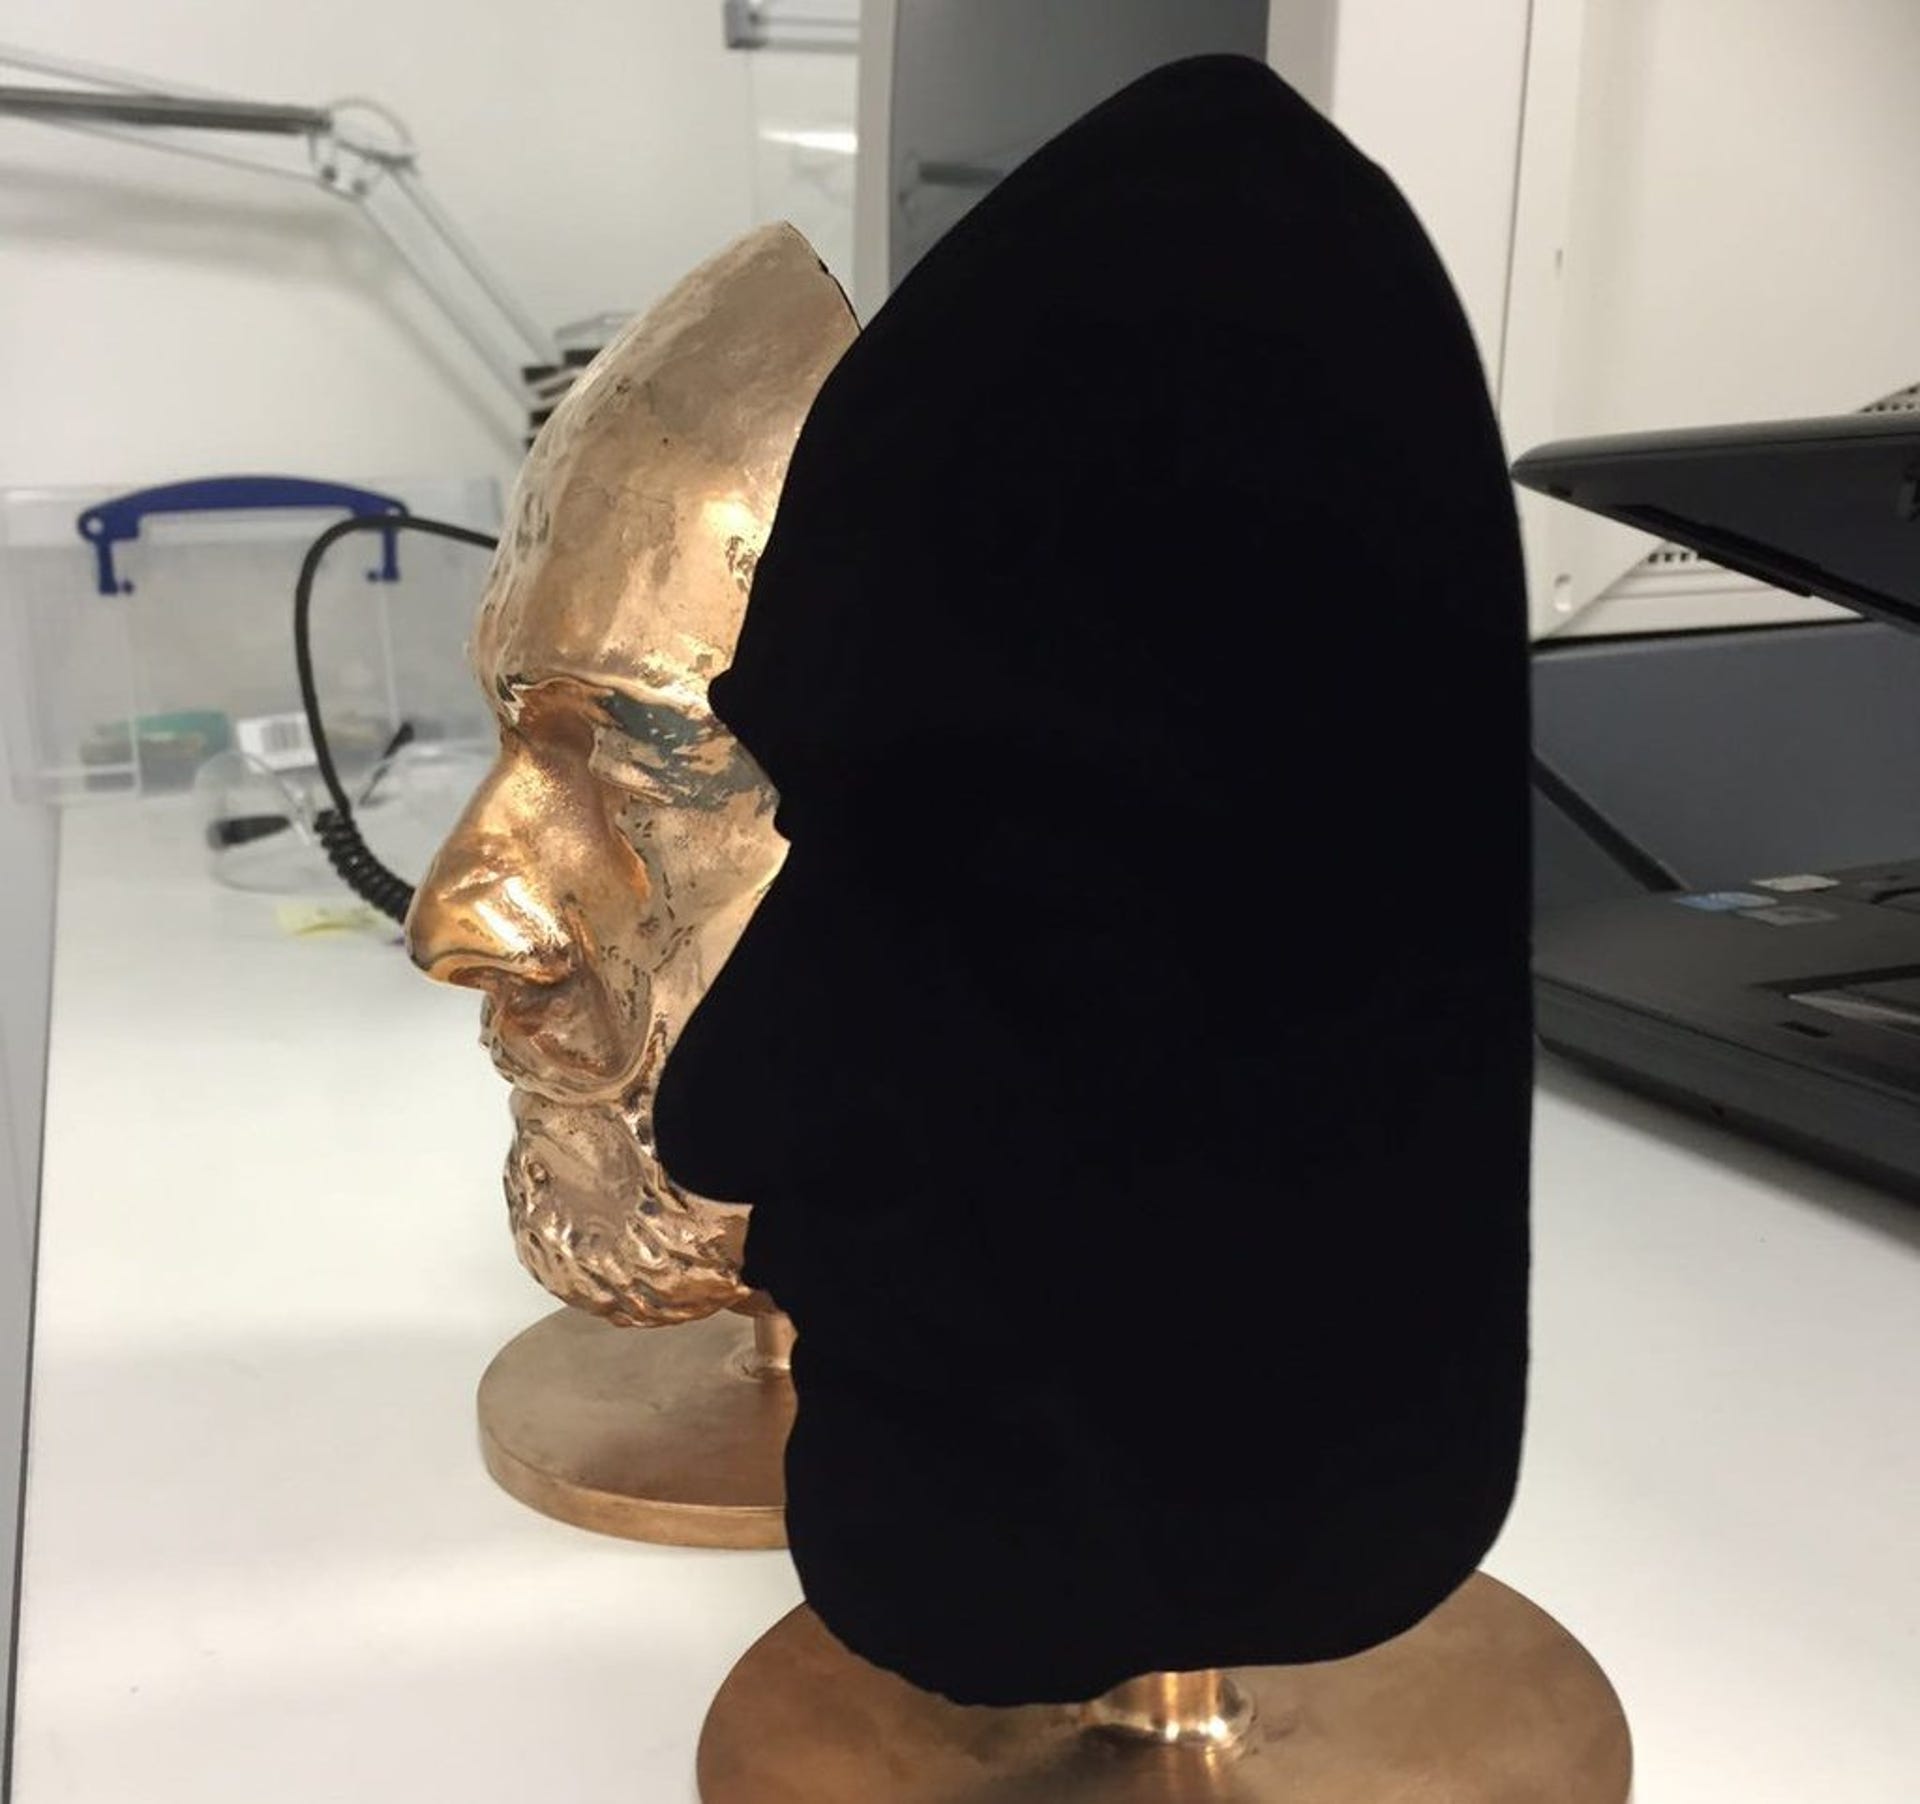 Vantablack, 'world's blackest material,' now comes in a spray - CNET